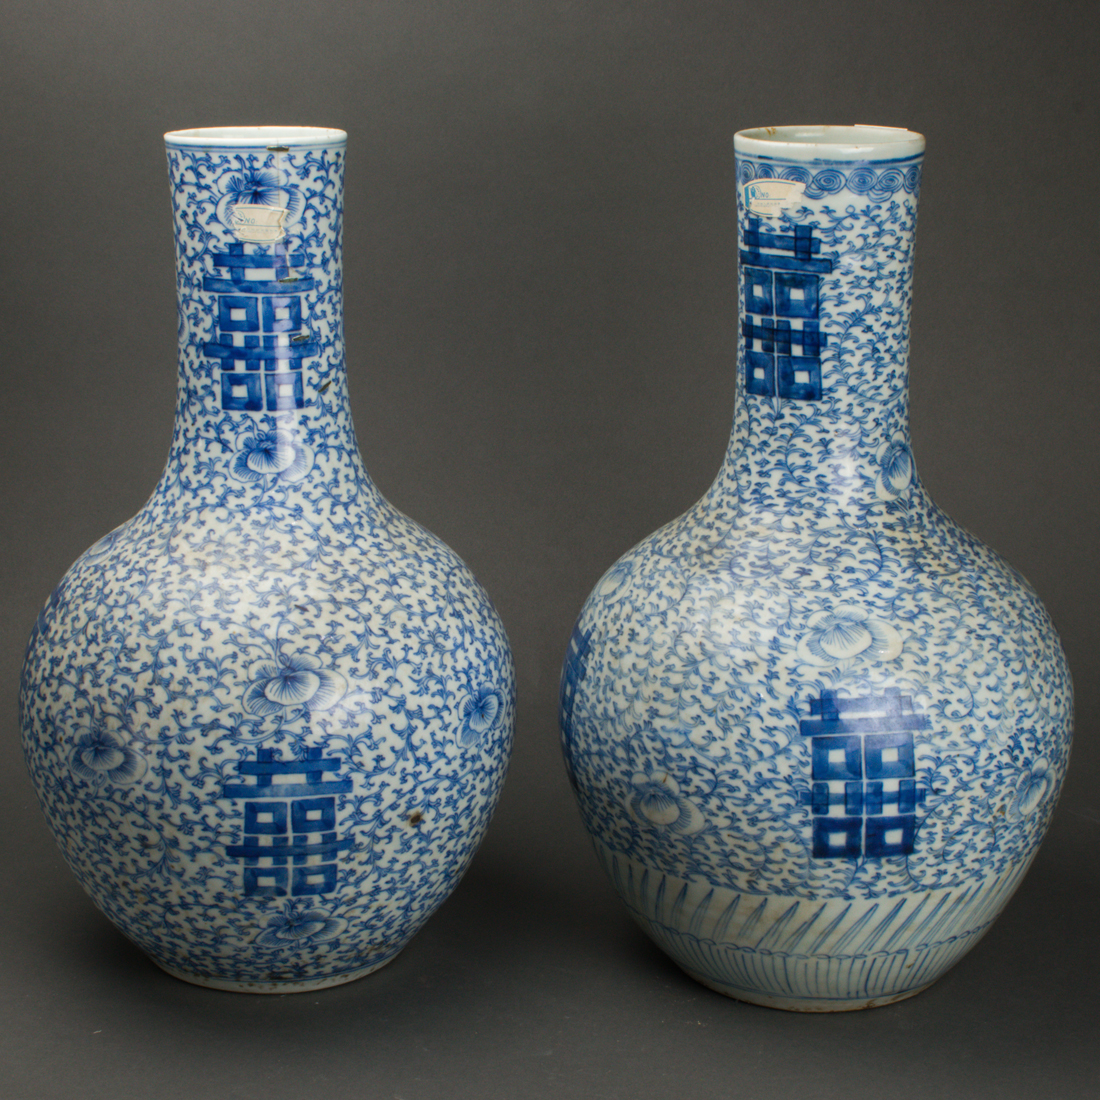 ASSOCIATED PAIR OF CHINESE BLUE 2d2dd9